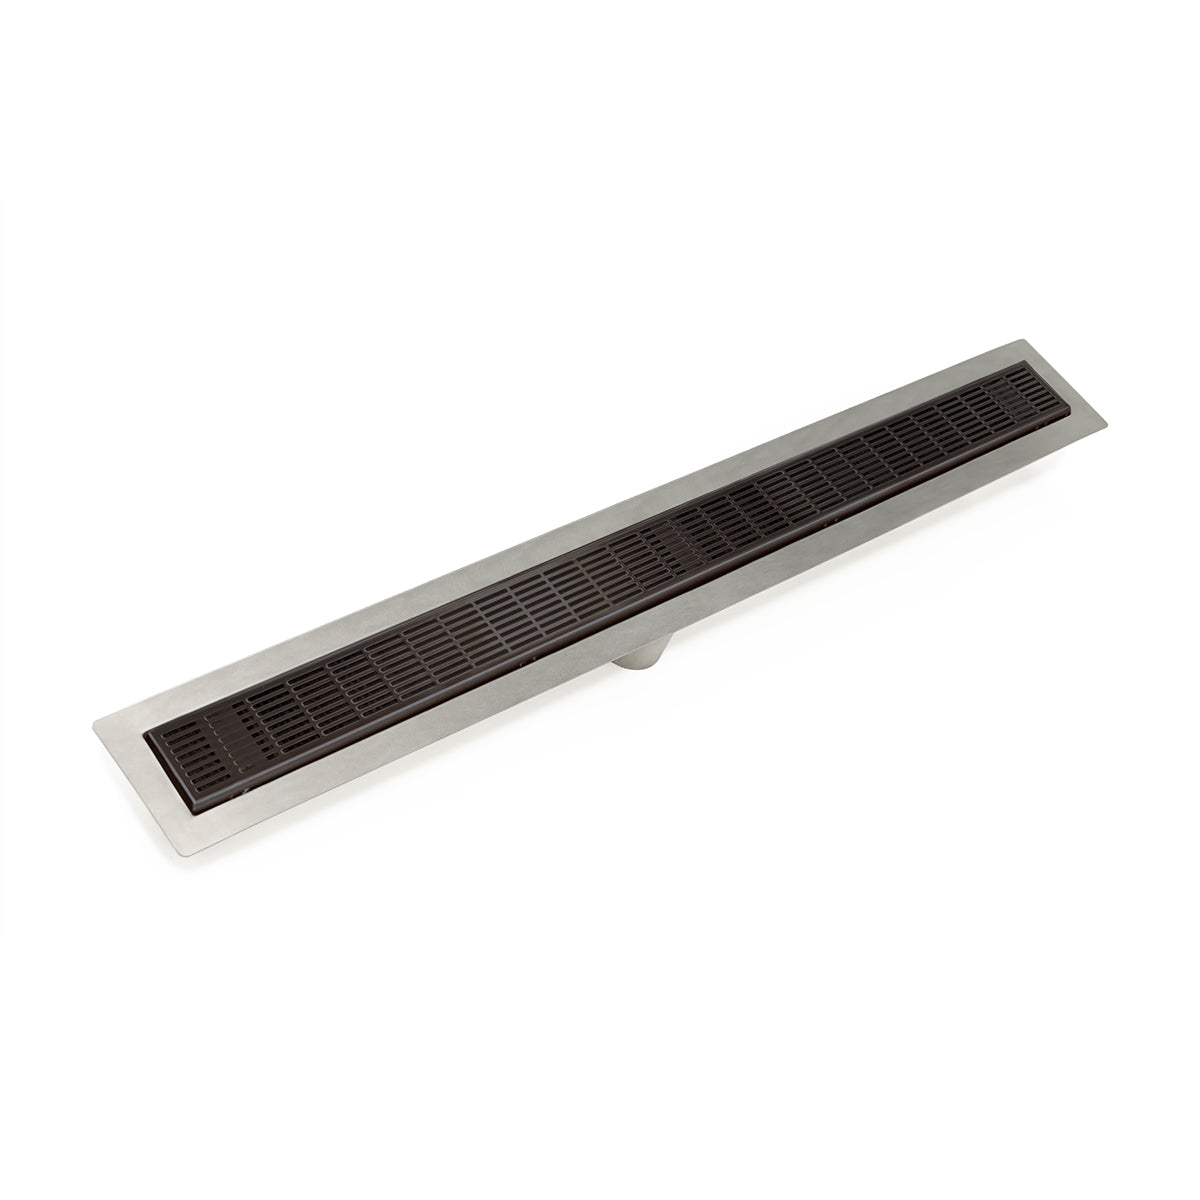 Infinity Drain 24" FF Series Fixed Flange Linear Drain Kit with 2 1/2" Perforated Slotted Grate